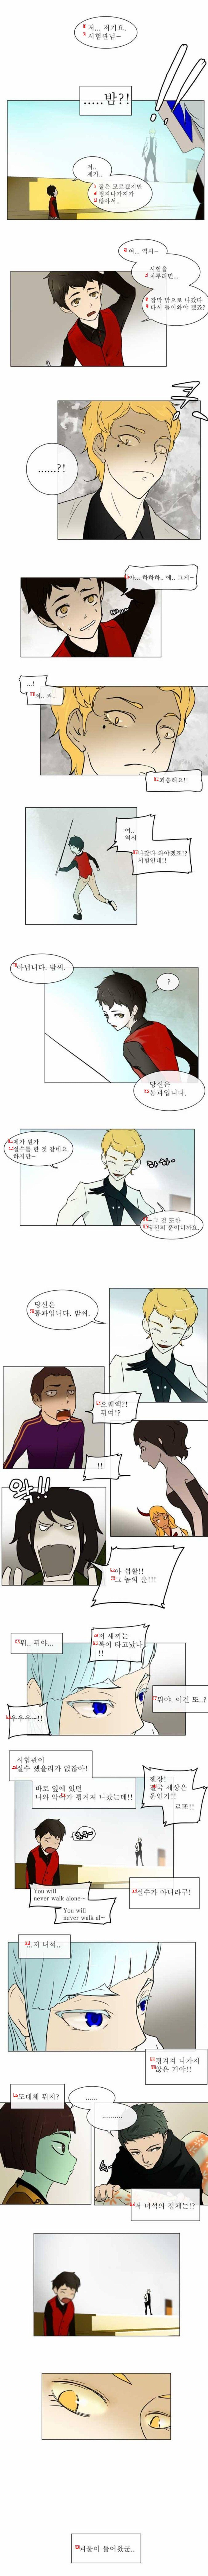 When I was young in the webtoon <The Tower of God>